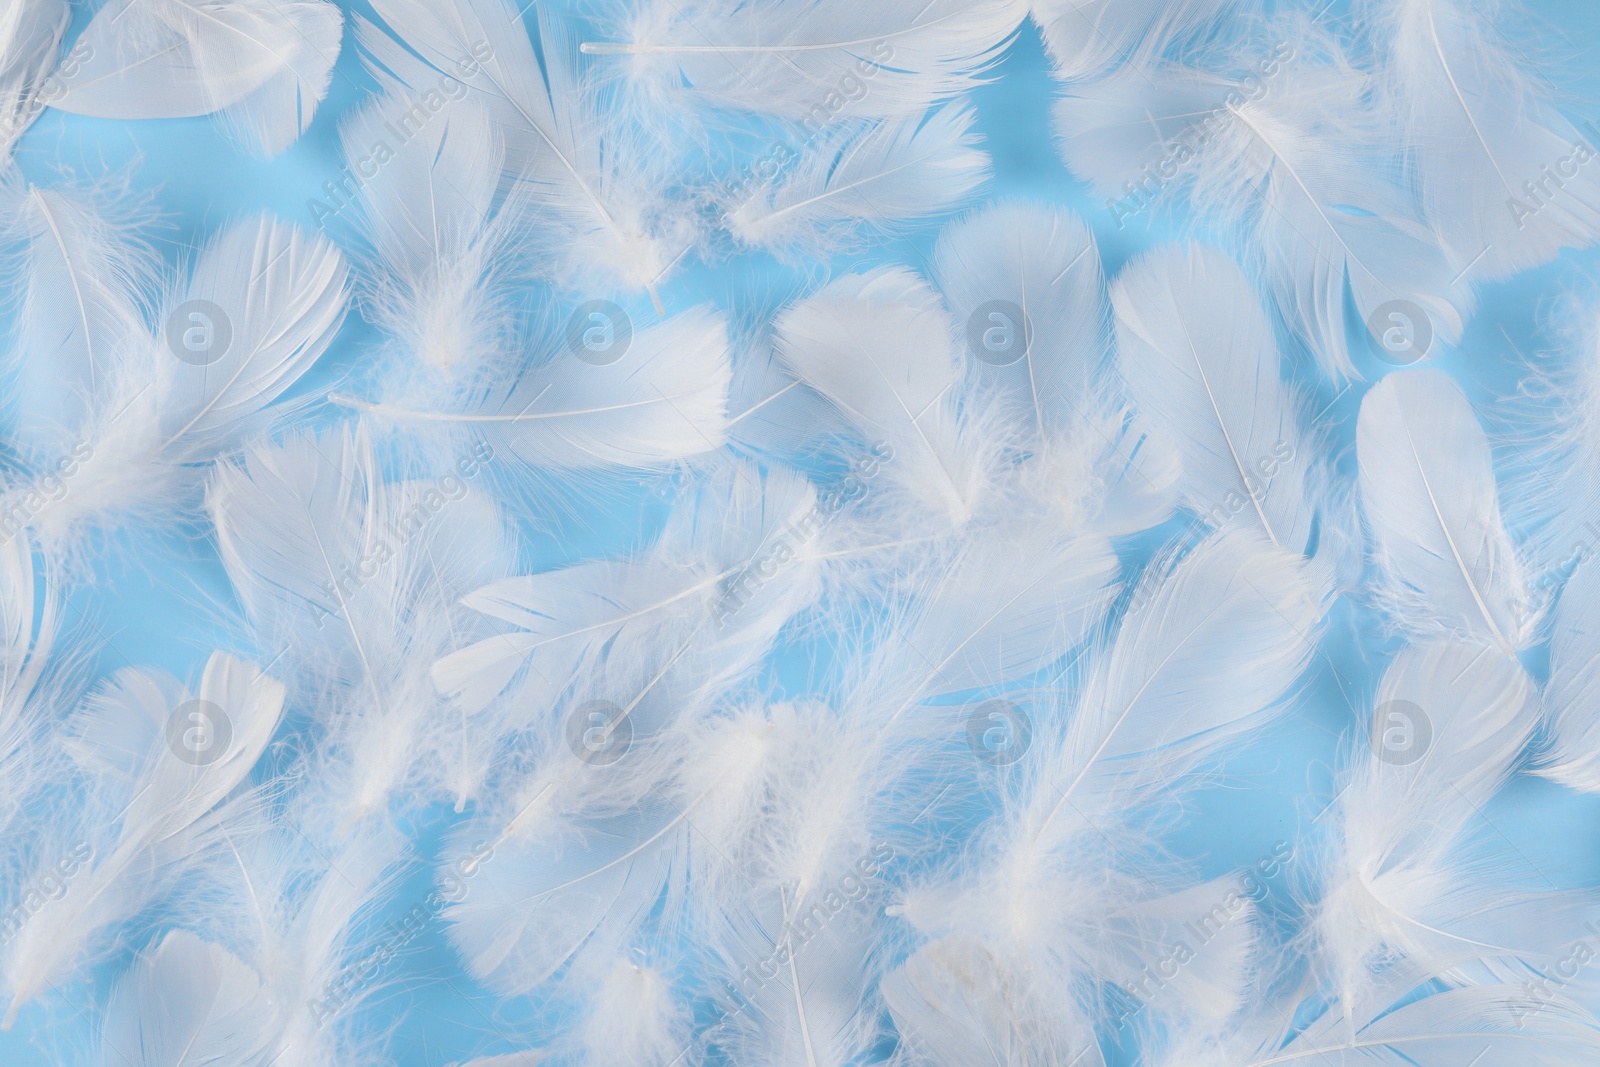 Photo of Fluffy white feathers on light blue background, flat lay